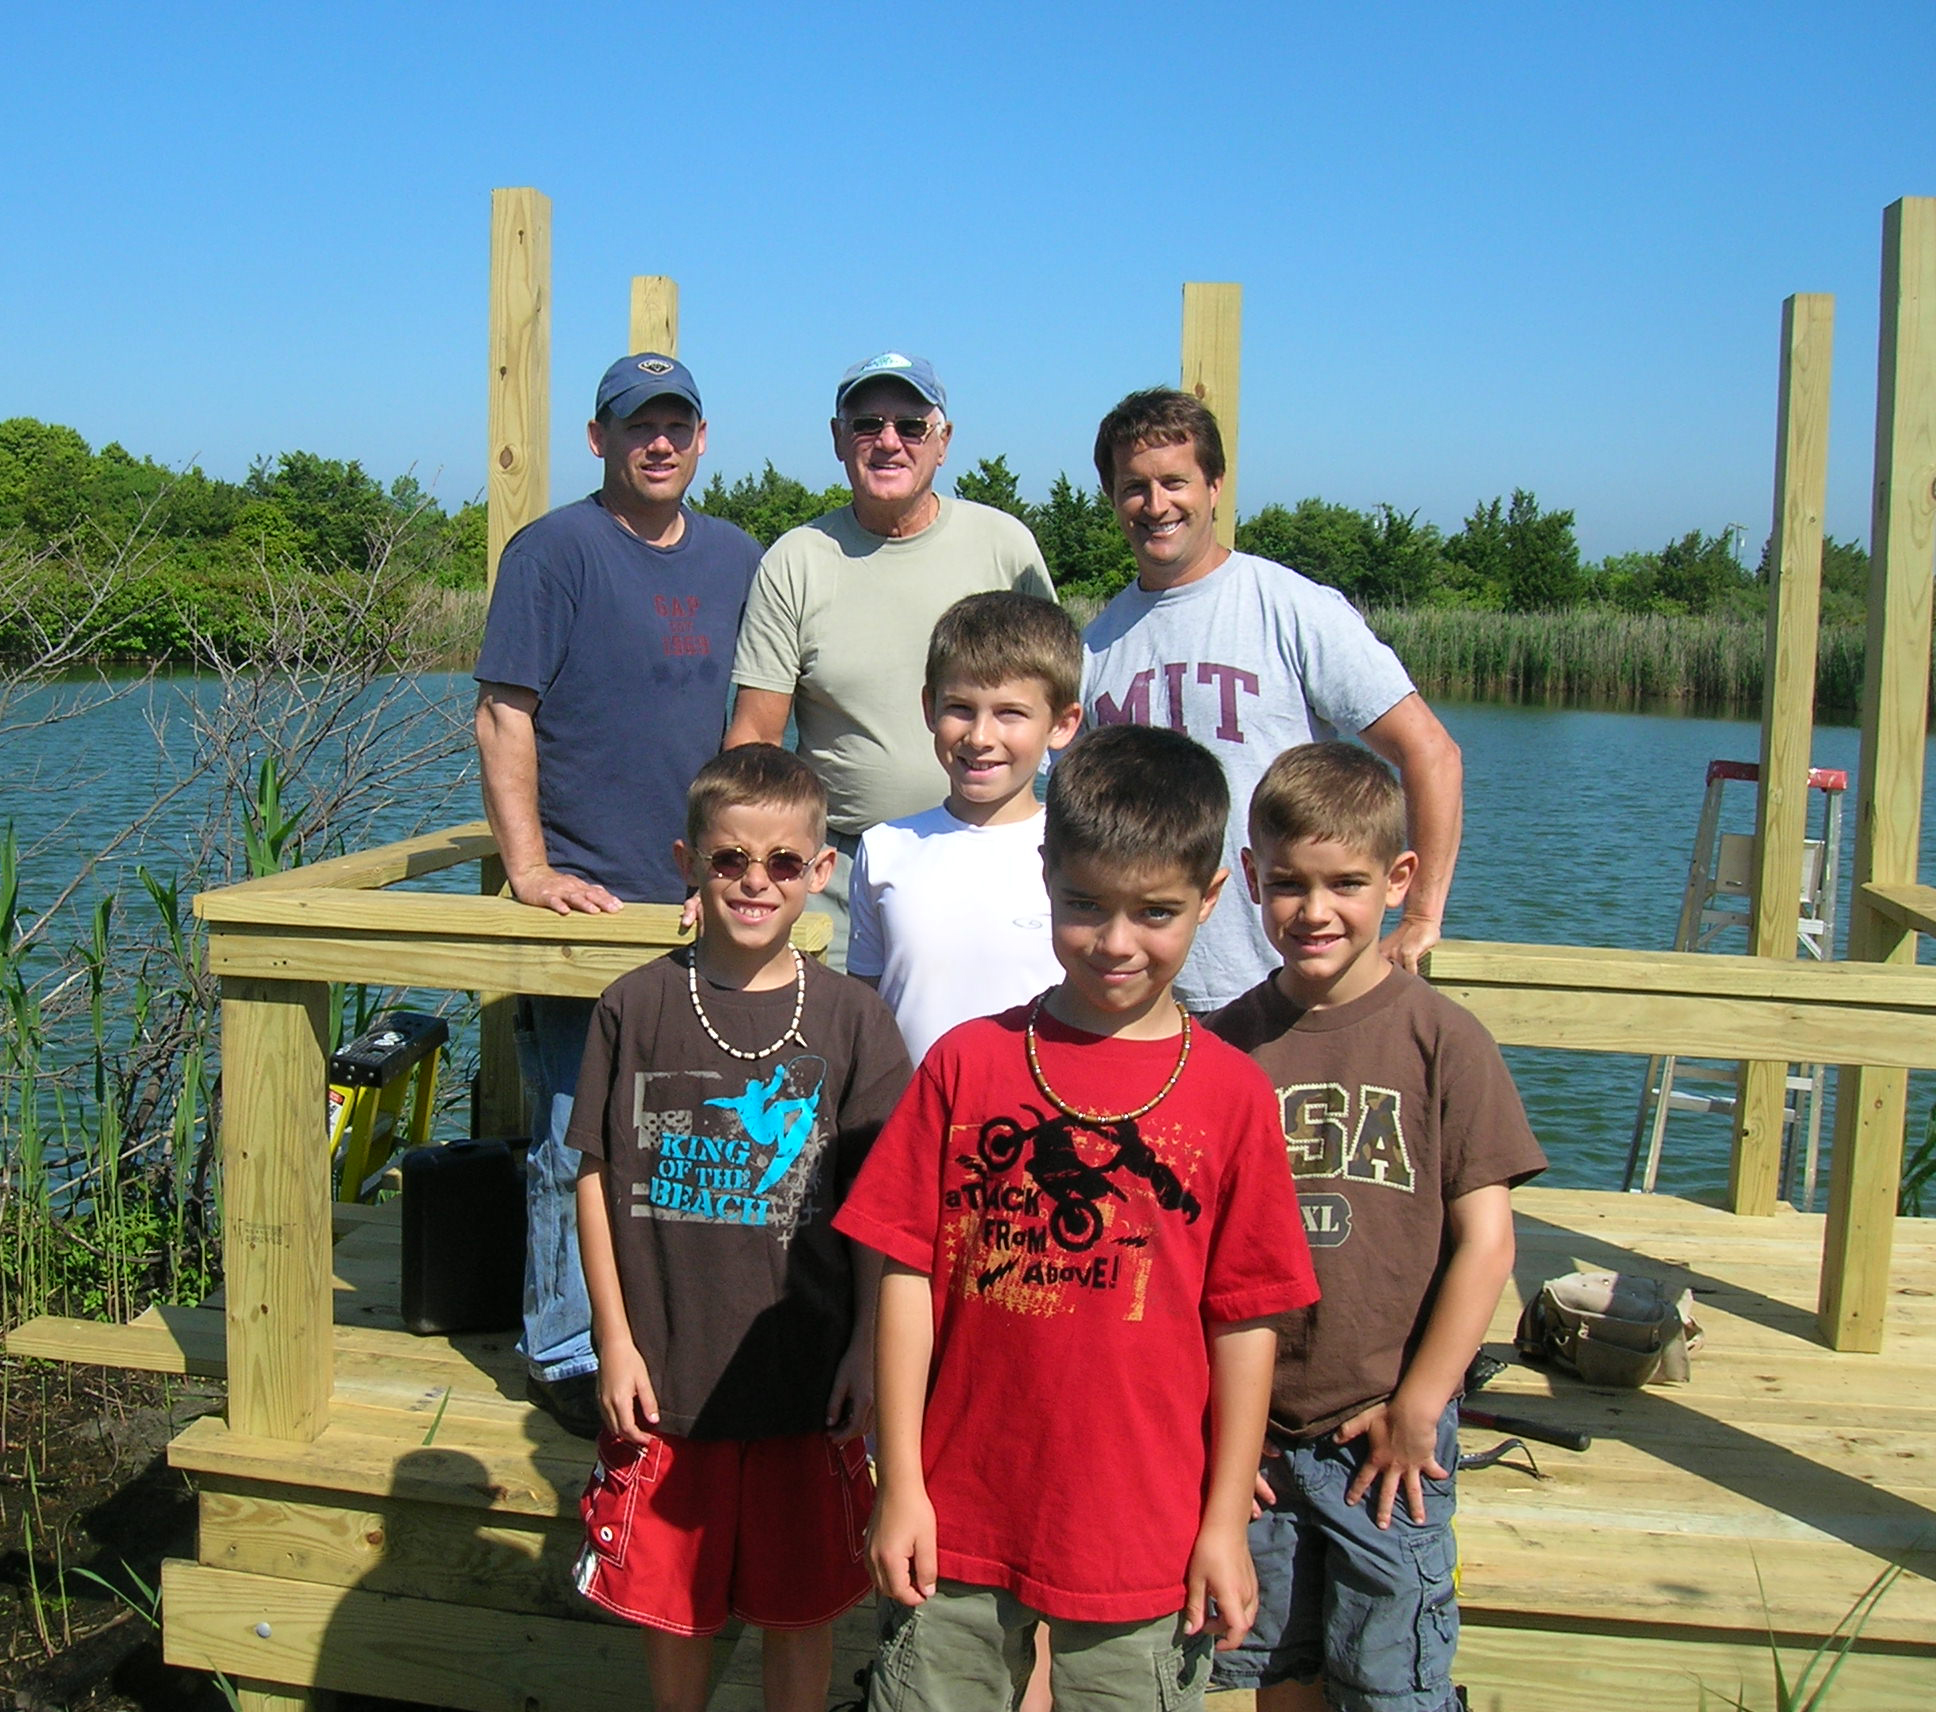 Part of the "can do" volunteer team that rebuild the wildlife viewing platform at the Sandy Hook Unit of Gateway National Recreation Area, NJ.